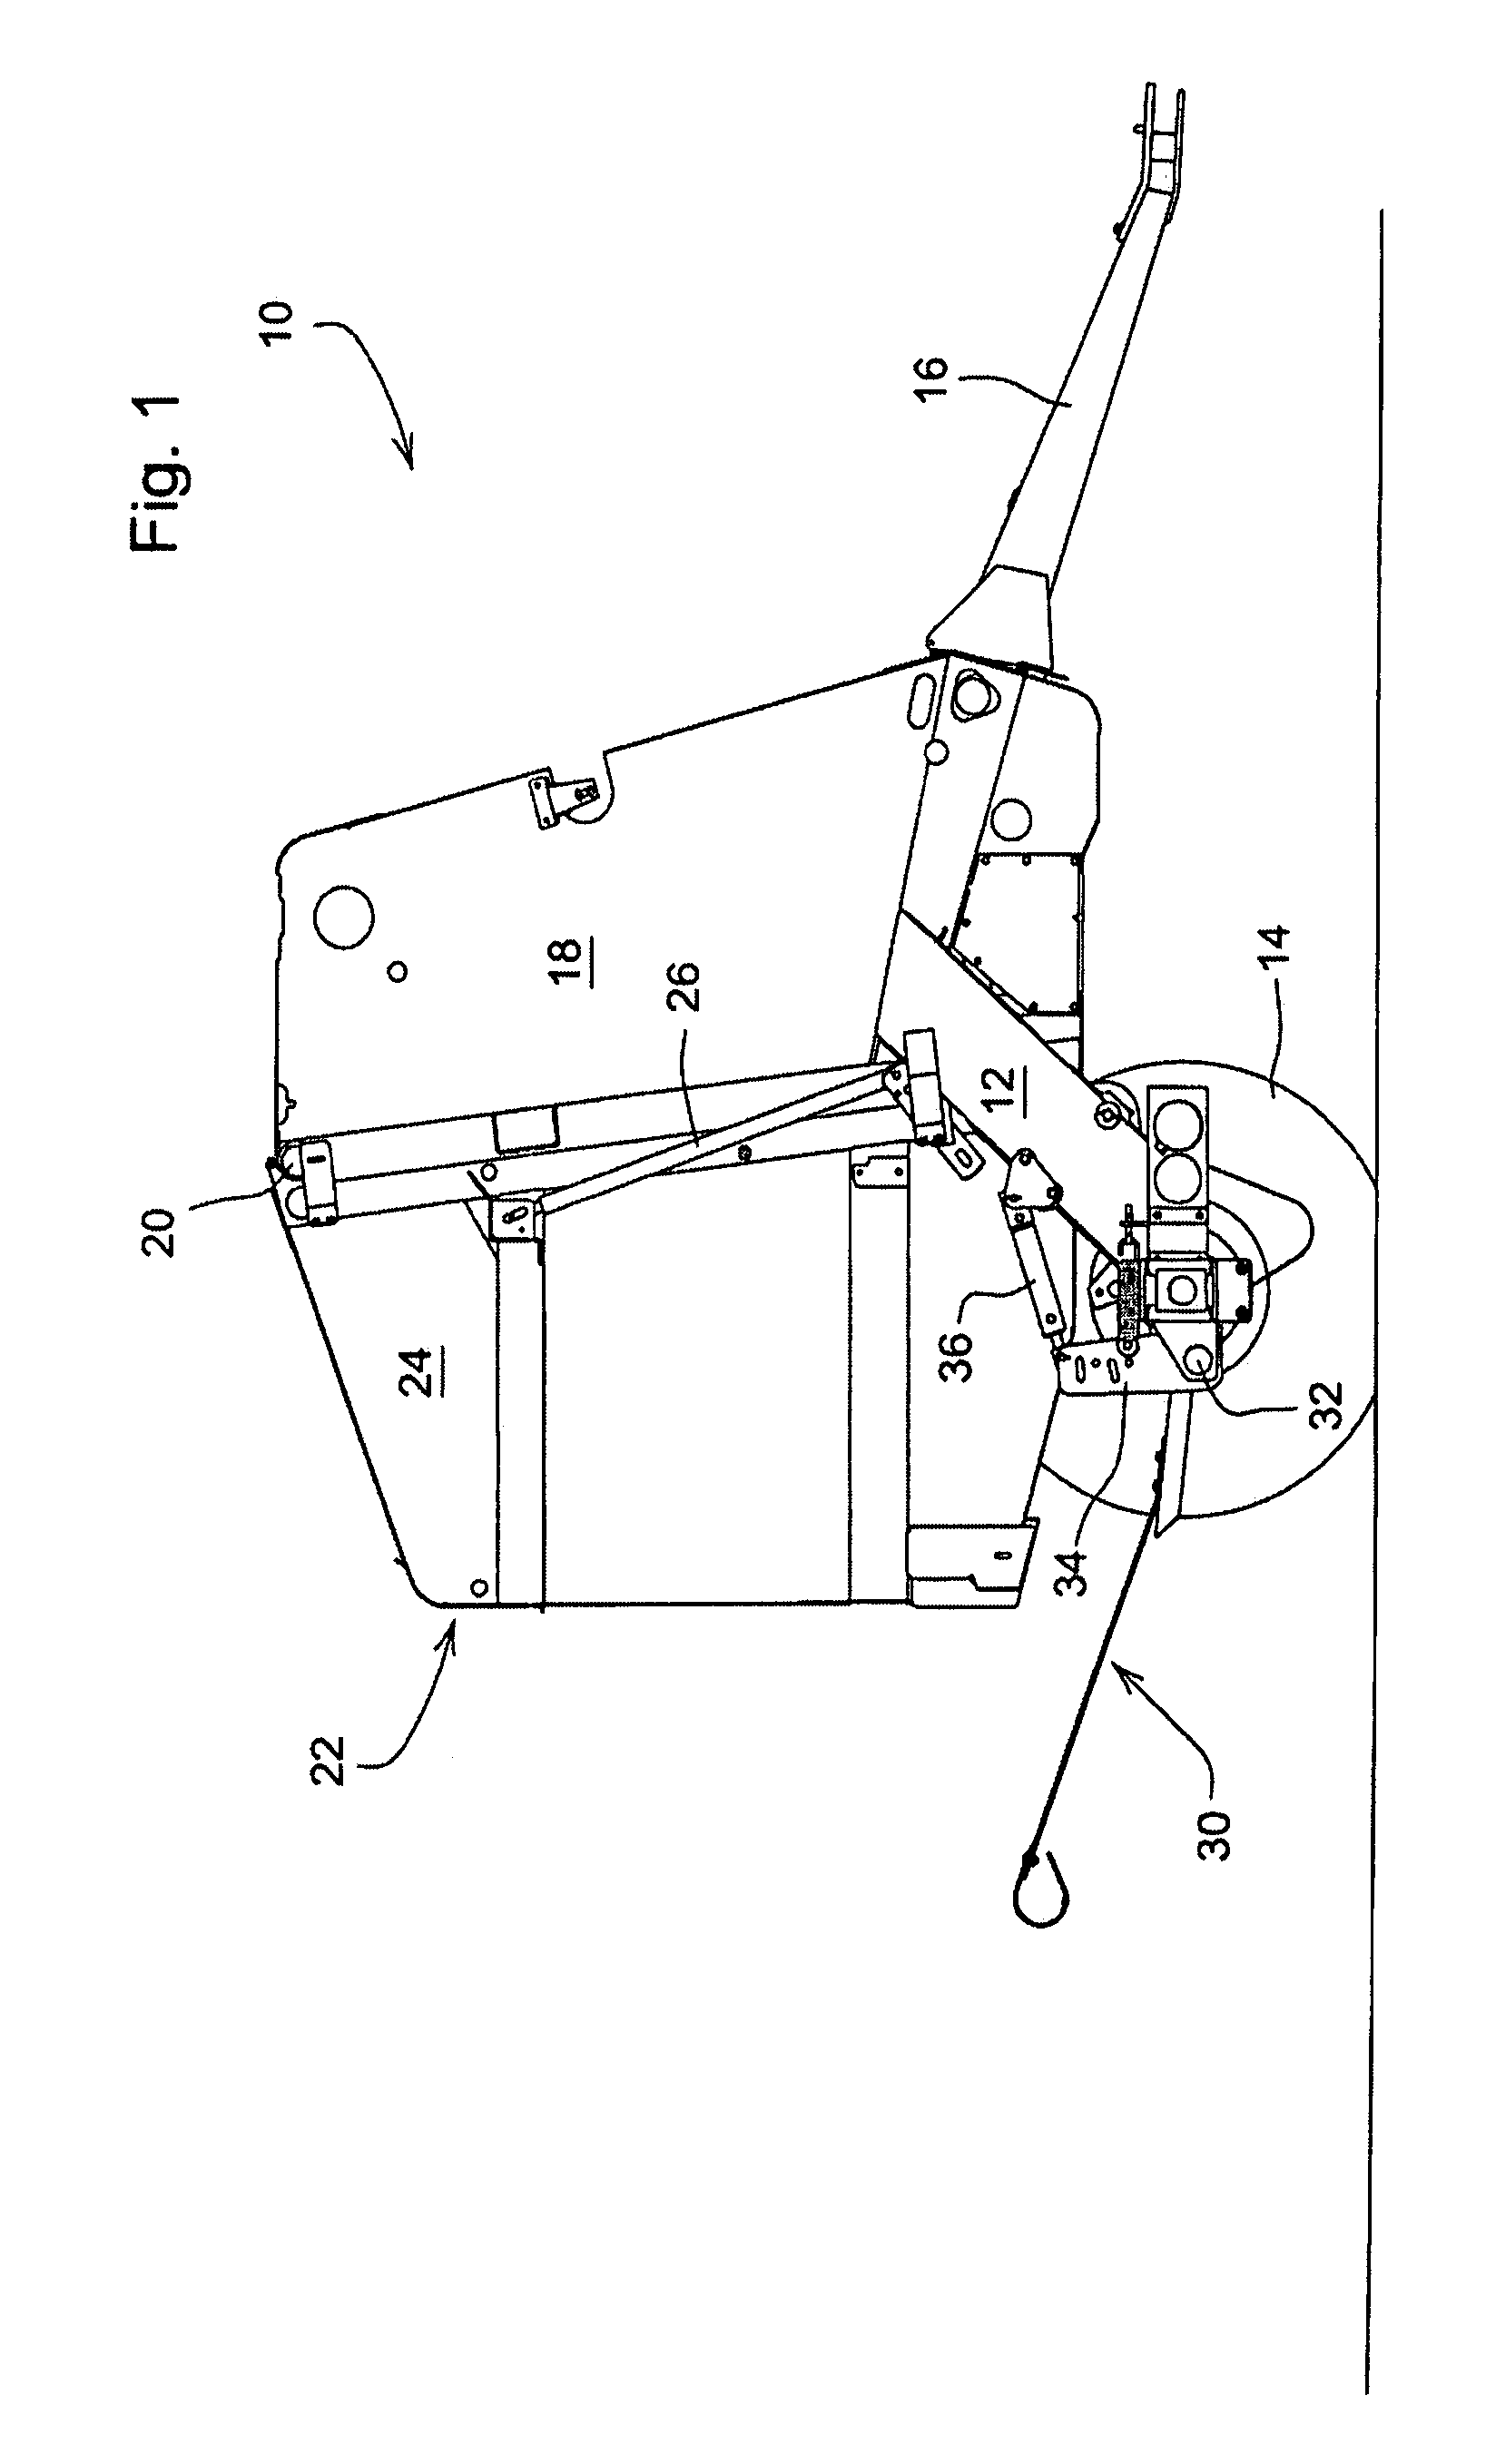 Sequence and timing control for large round baler ejection device